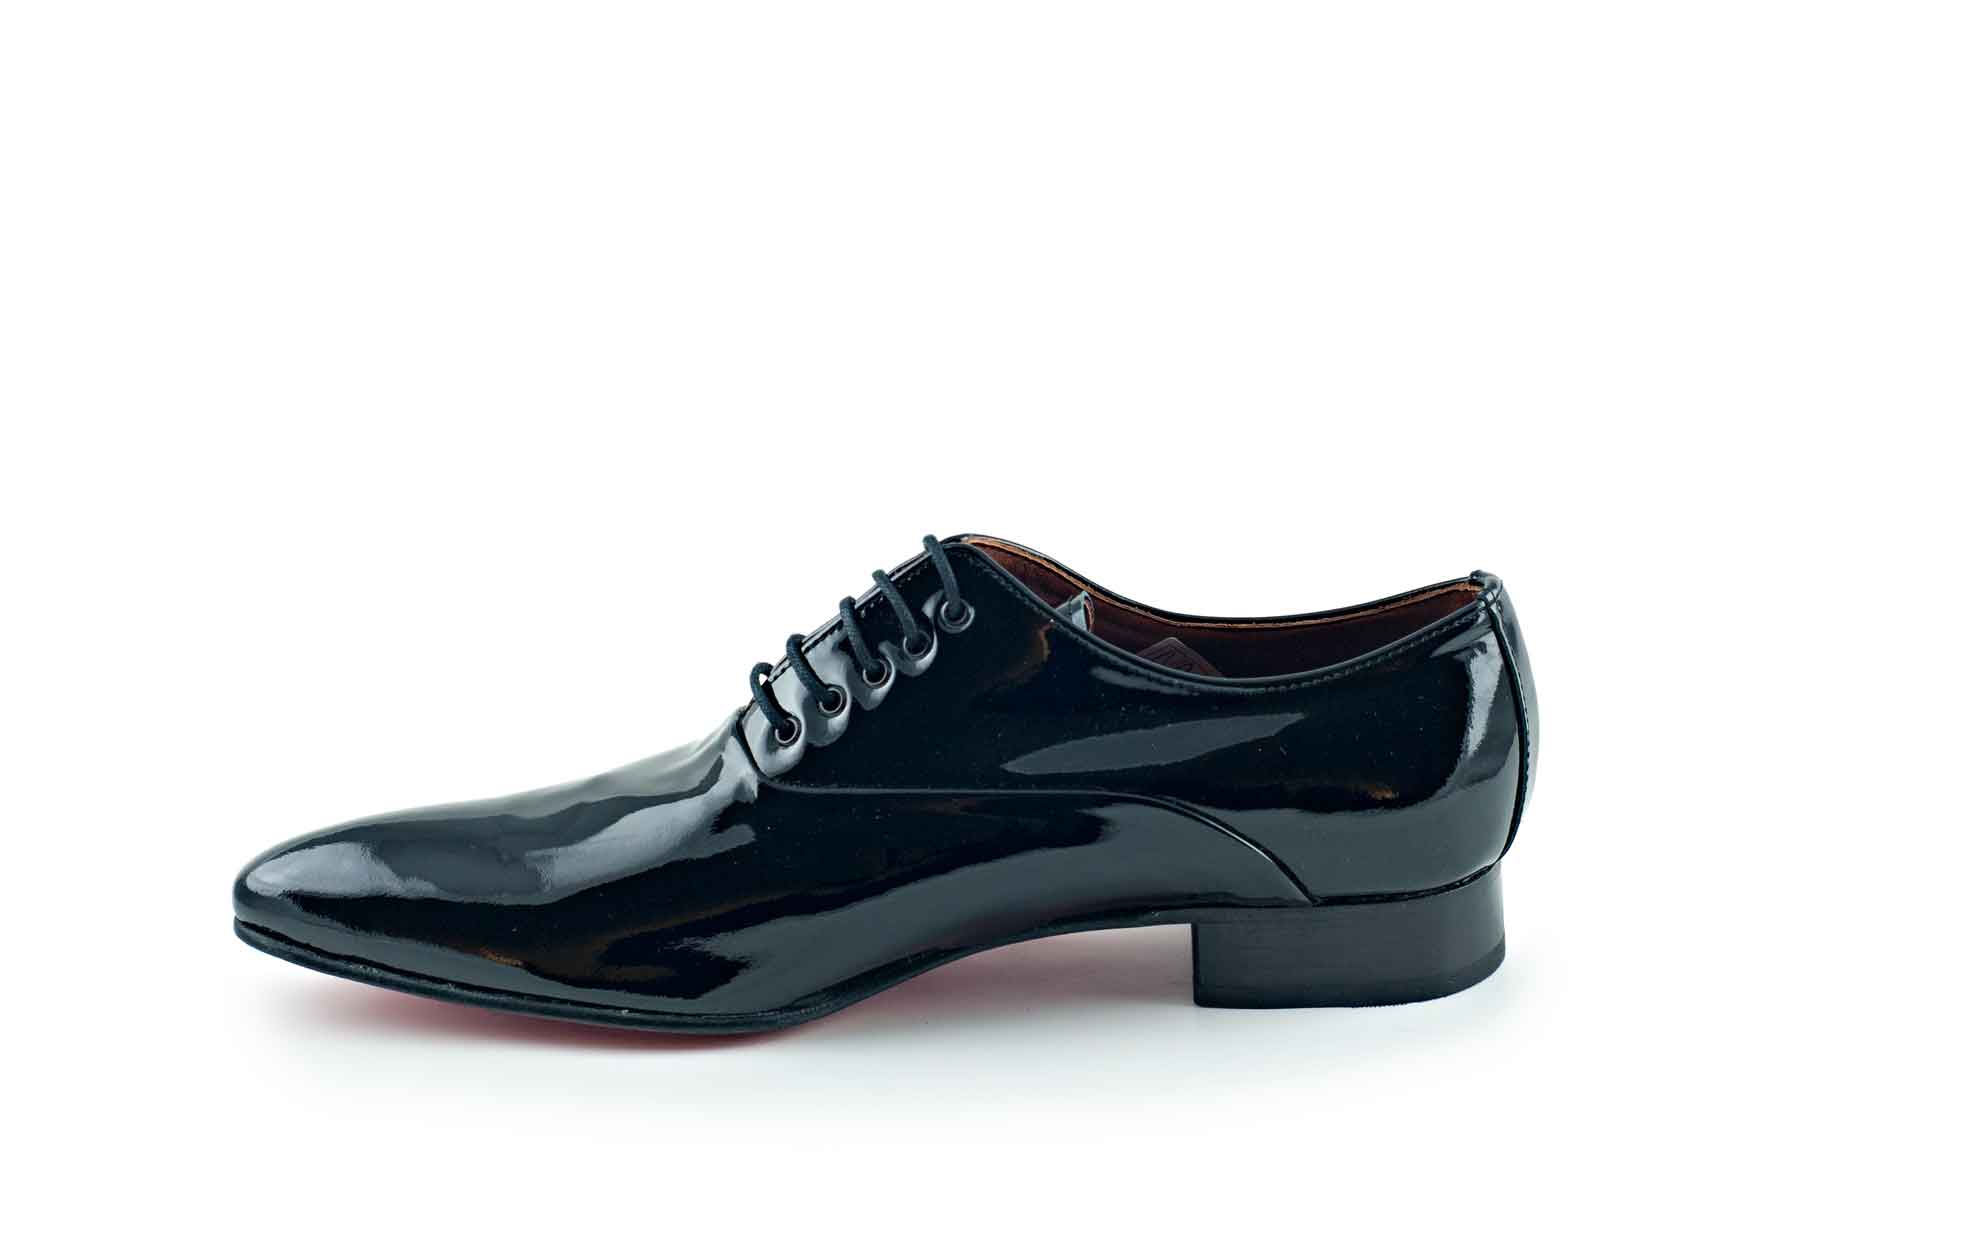 Sinatra shoe, manufactured in black patent leather.